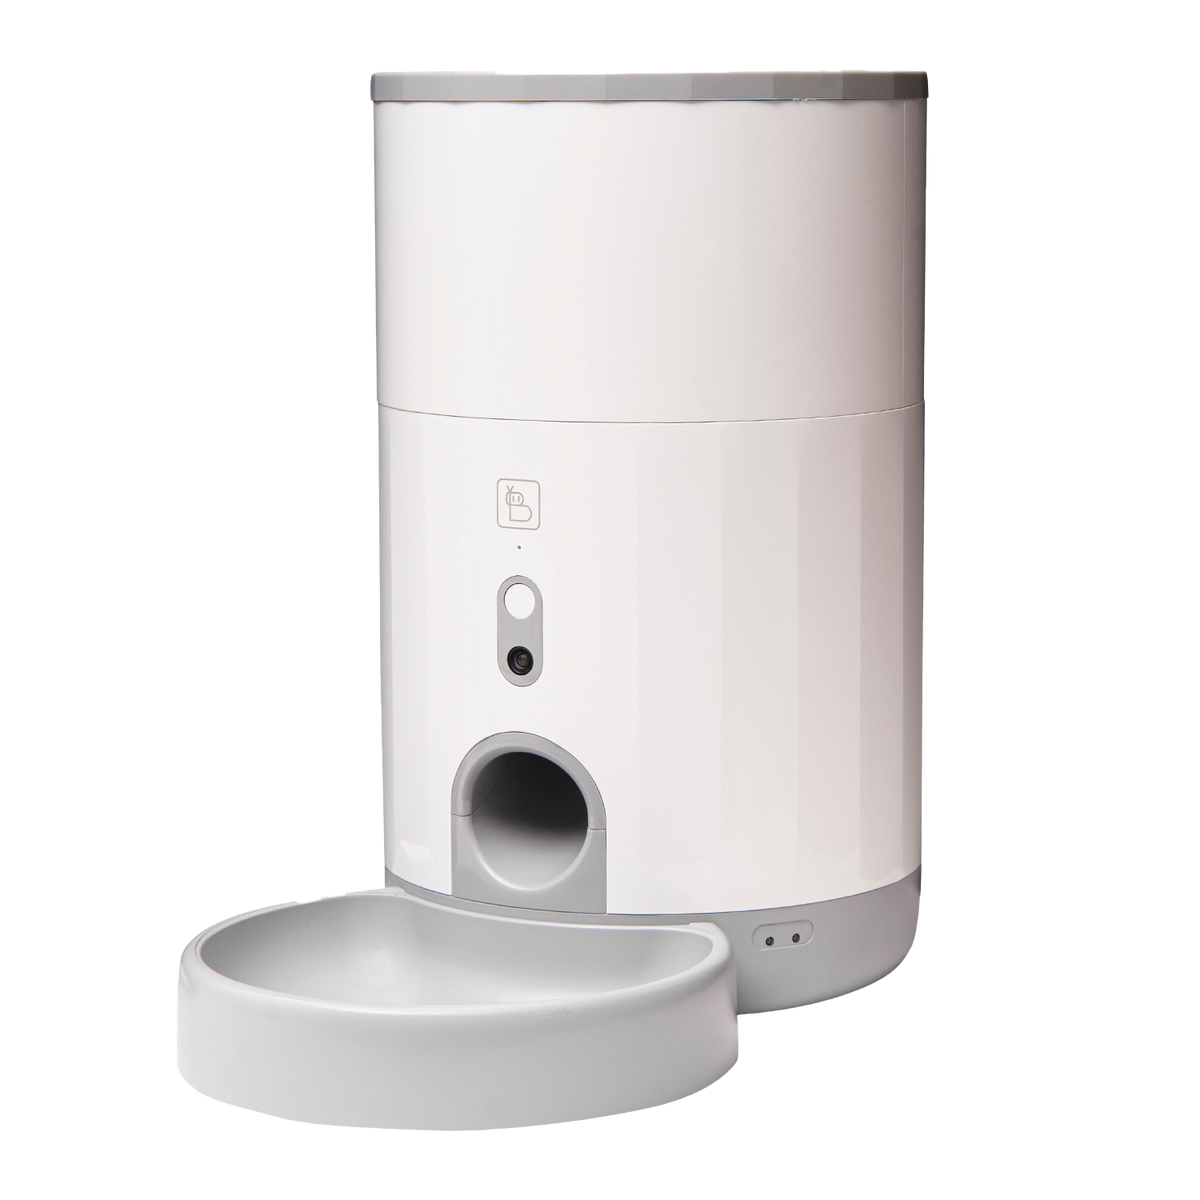 Baybot Pet Feeder (Dry) - automatic food dispenser for dog and cat | smart, WiFi connected